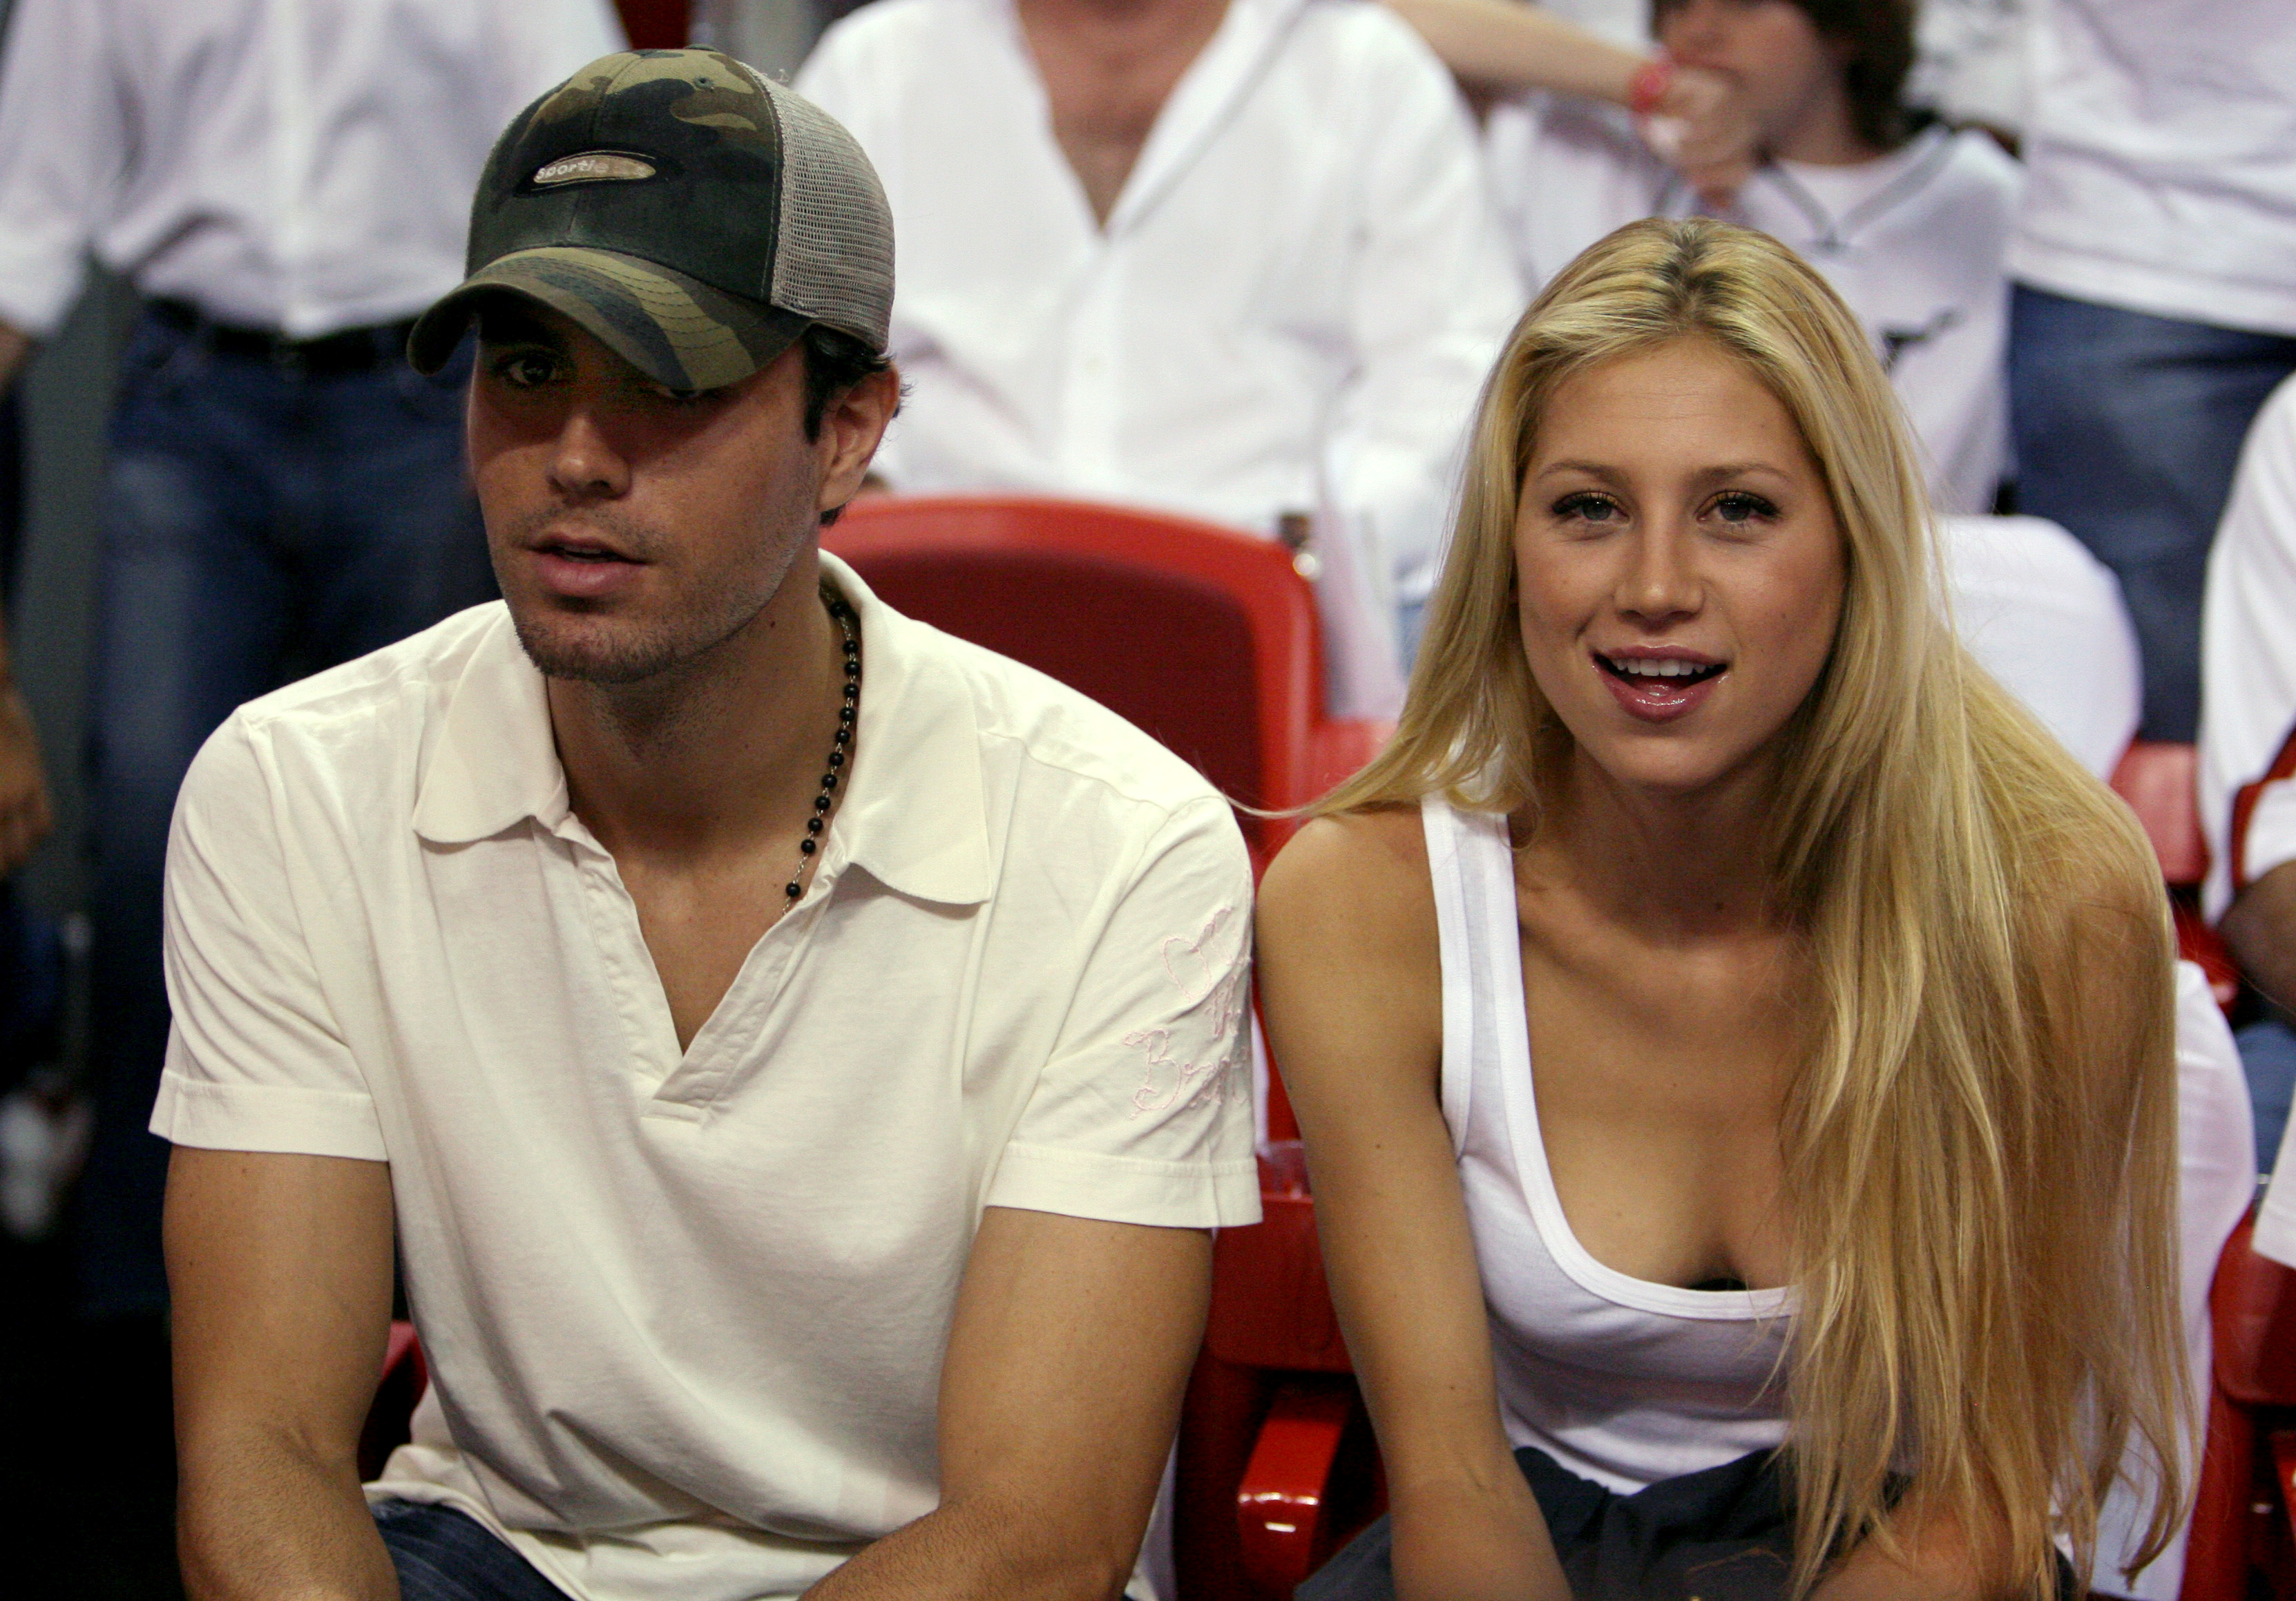 FILE PHOTO: Singer Enrique Iglesias (L) and tennis star Anna Kournikova of Russia watch as the [Dallas Mavericks meets the Miami Heat during Game 3] of their NBA Finals basketball game in Miami June 13, 2006/File Photo